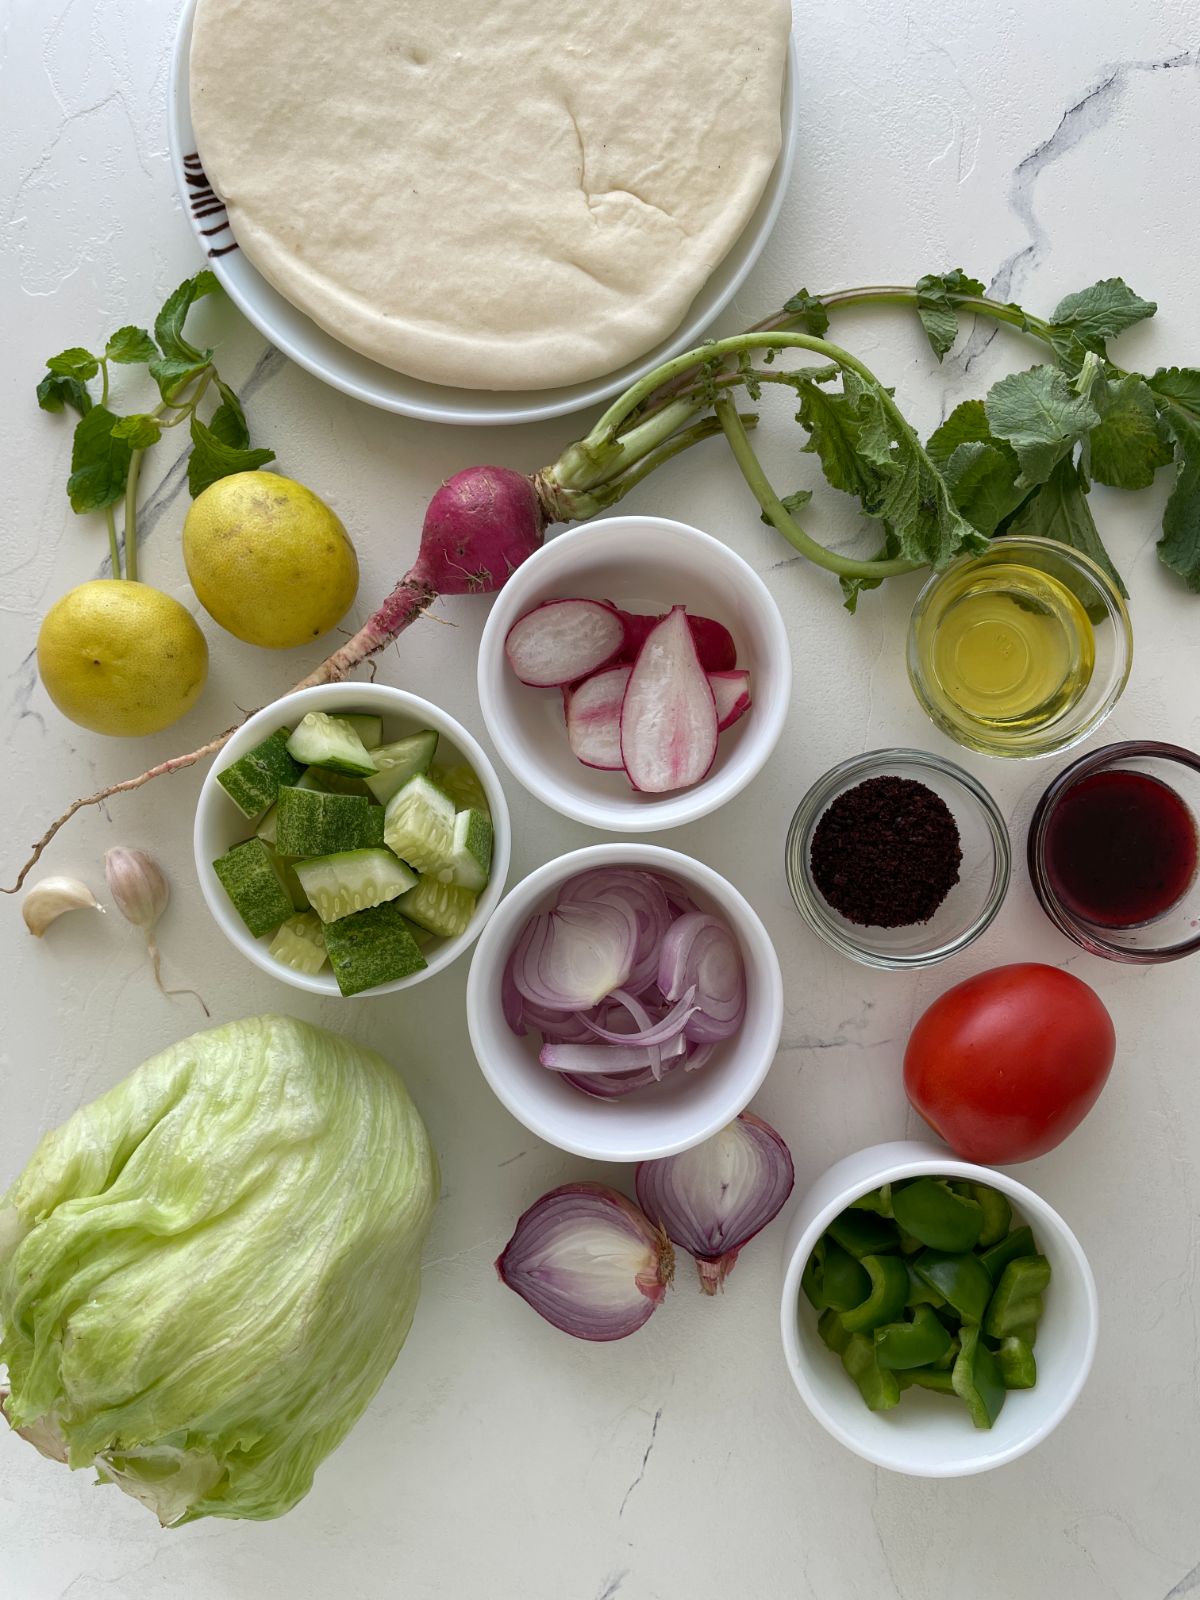 ingredients for the Fatoosh salad